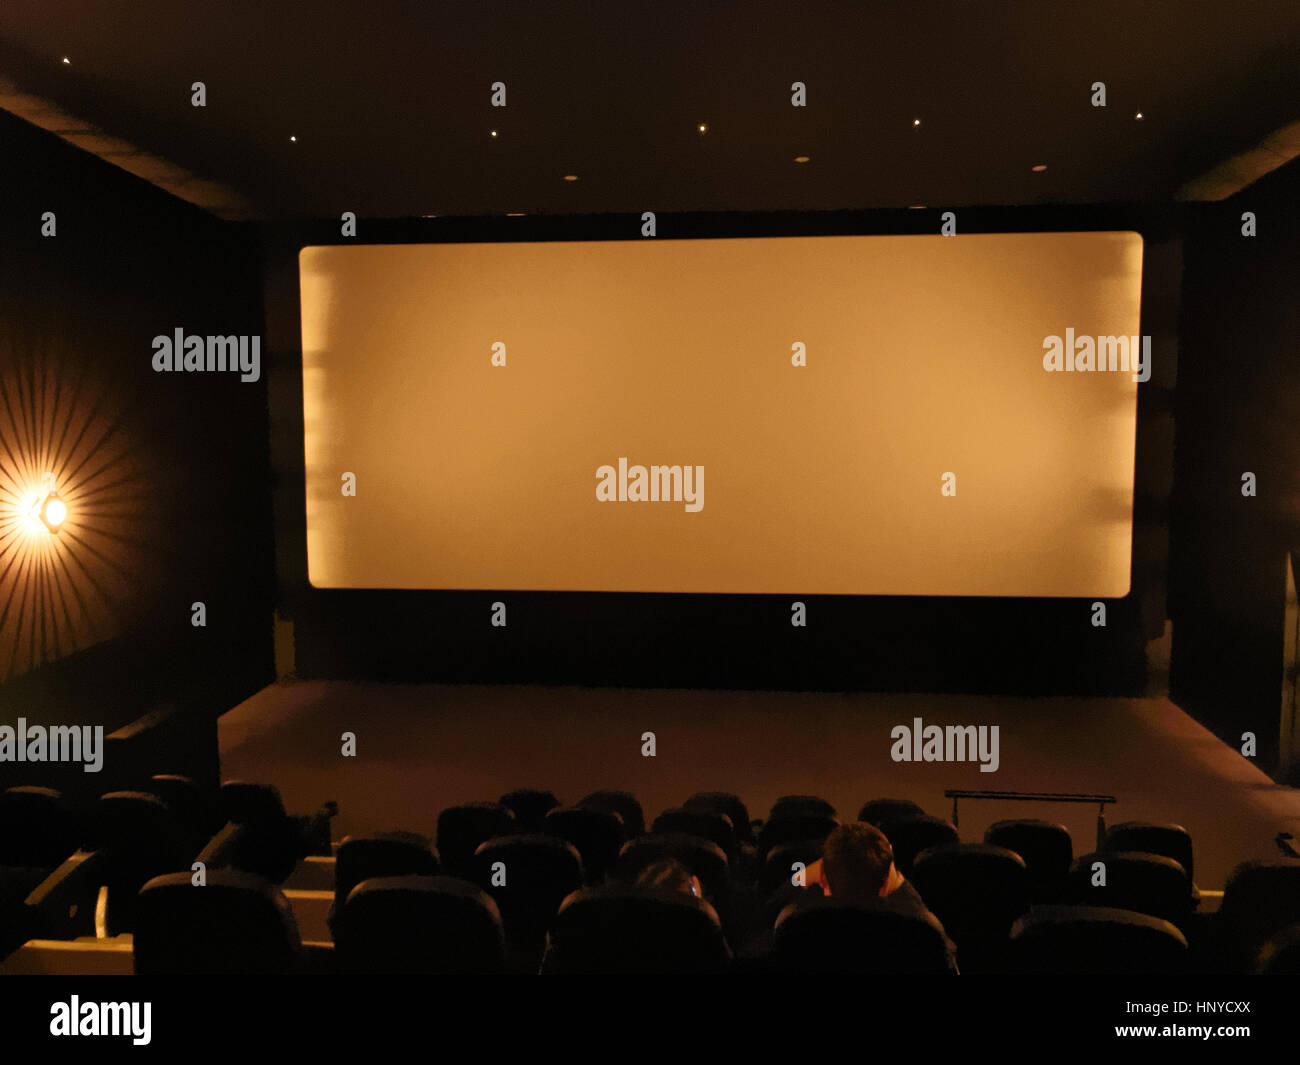 interior of cinema theater with screen and lights out Stock Photo